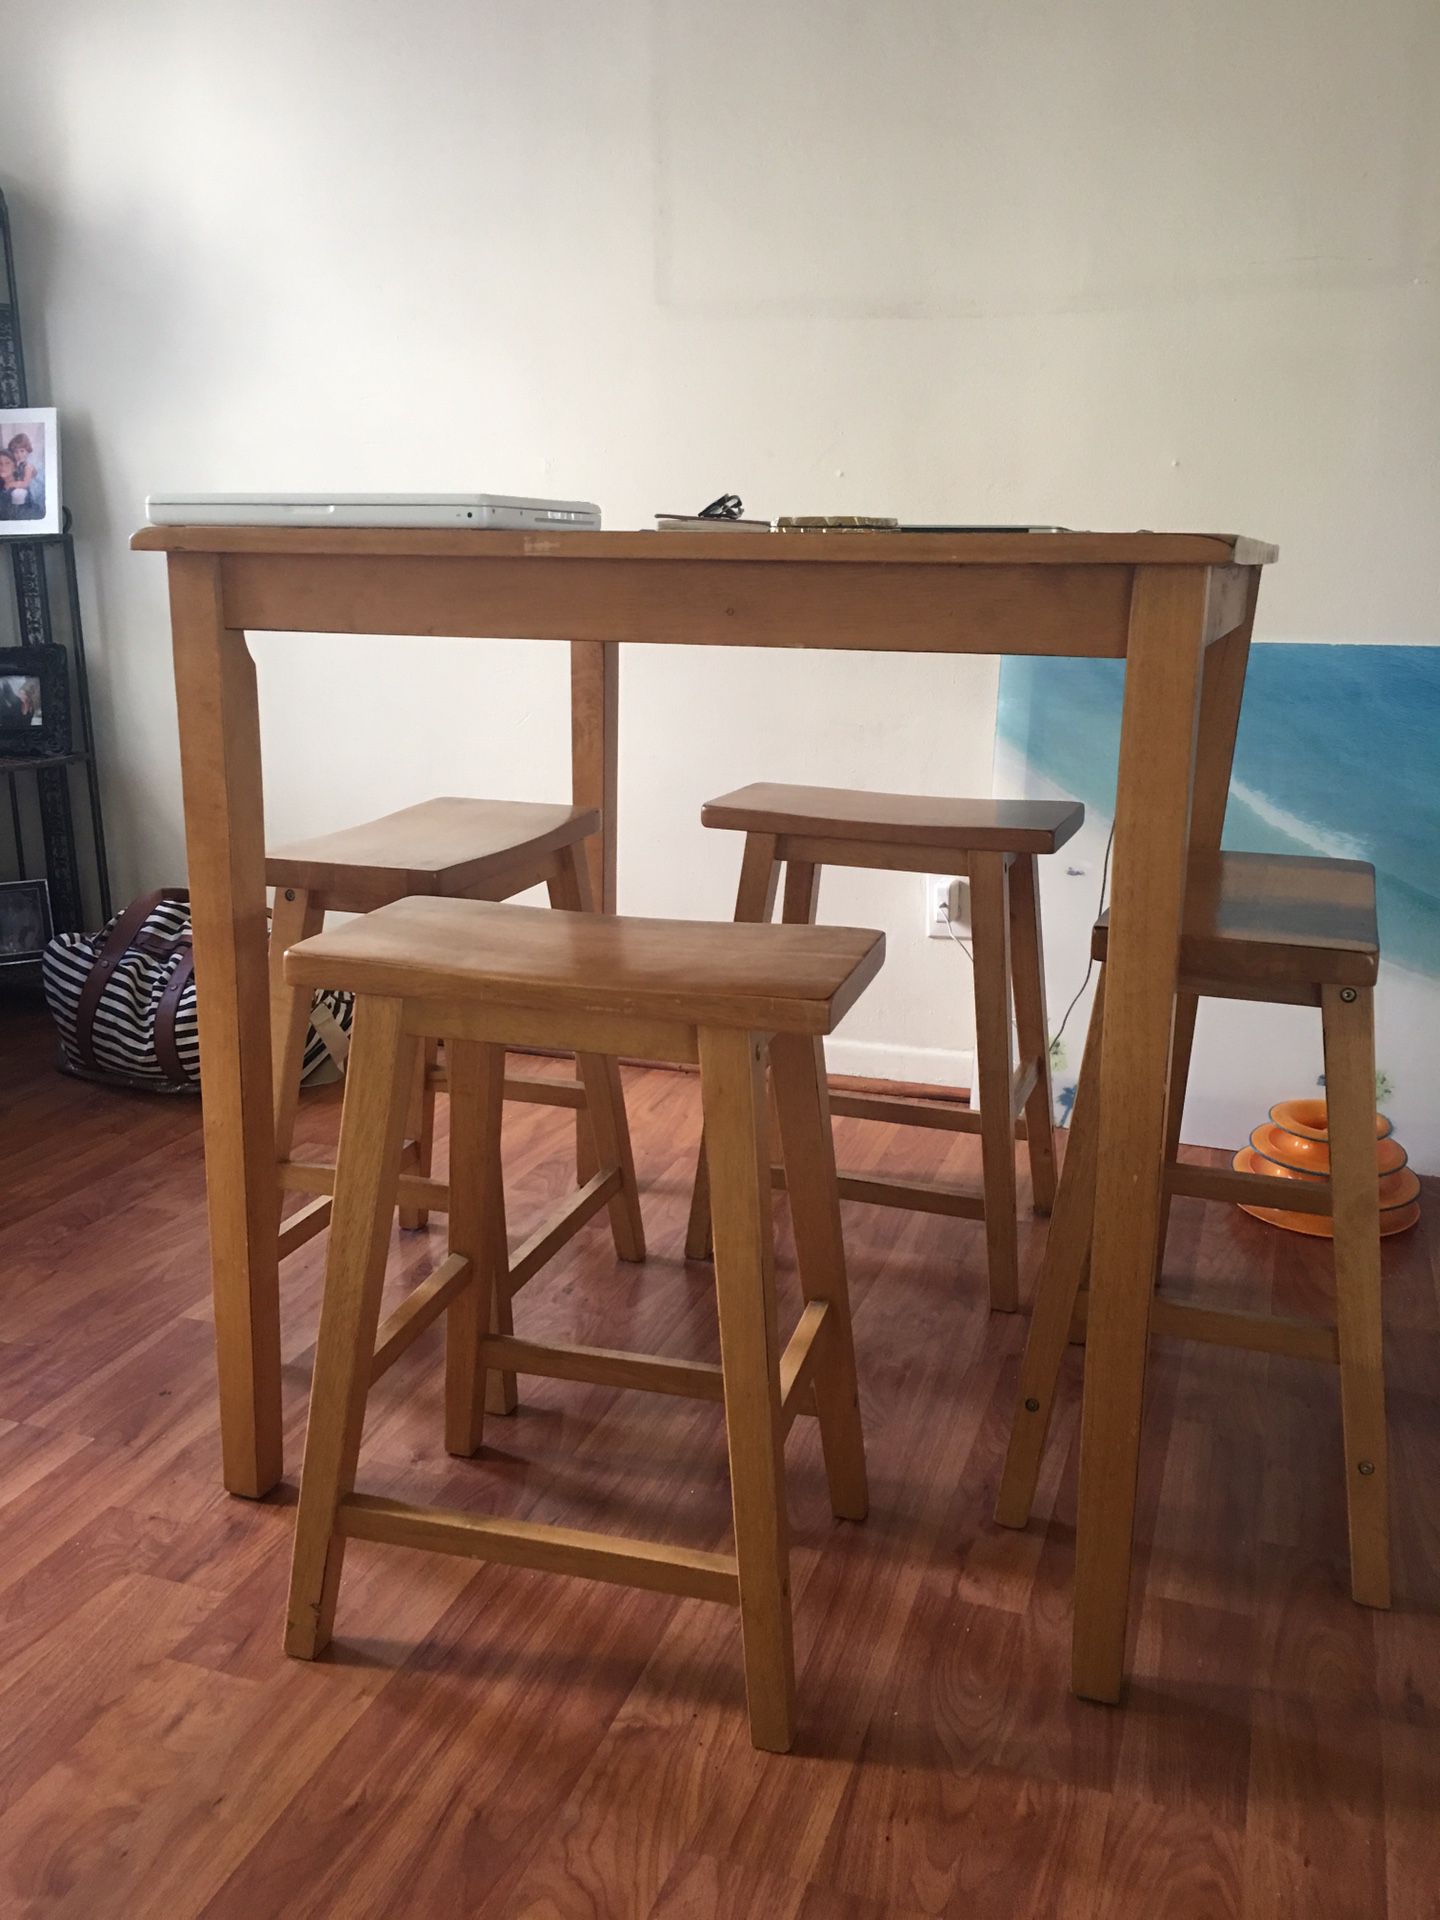 Bar height kitchen table with stools